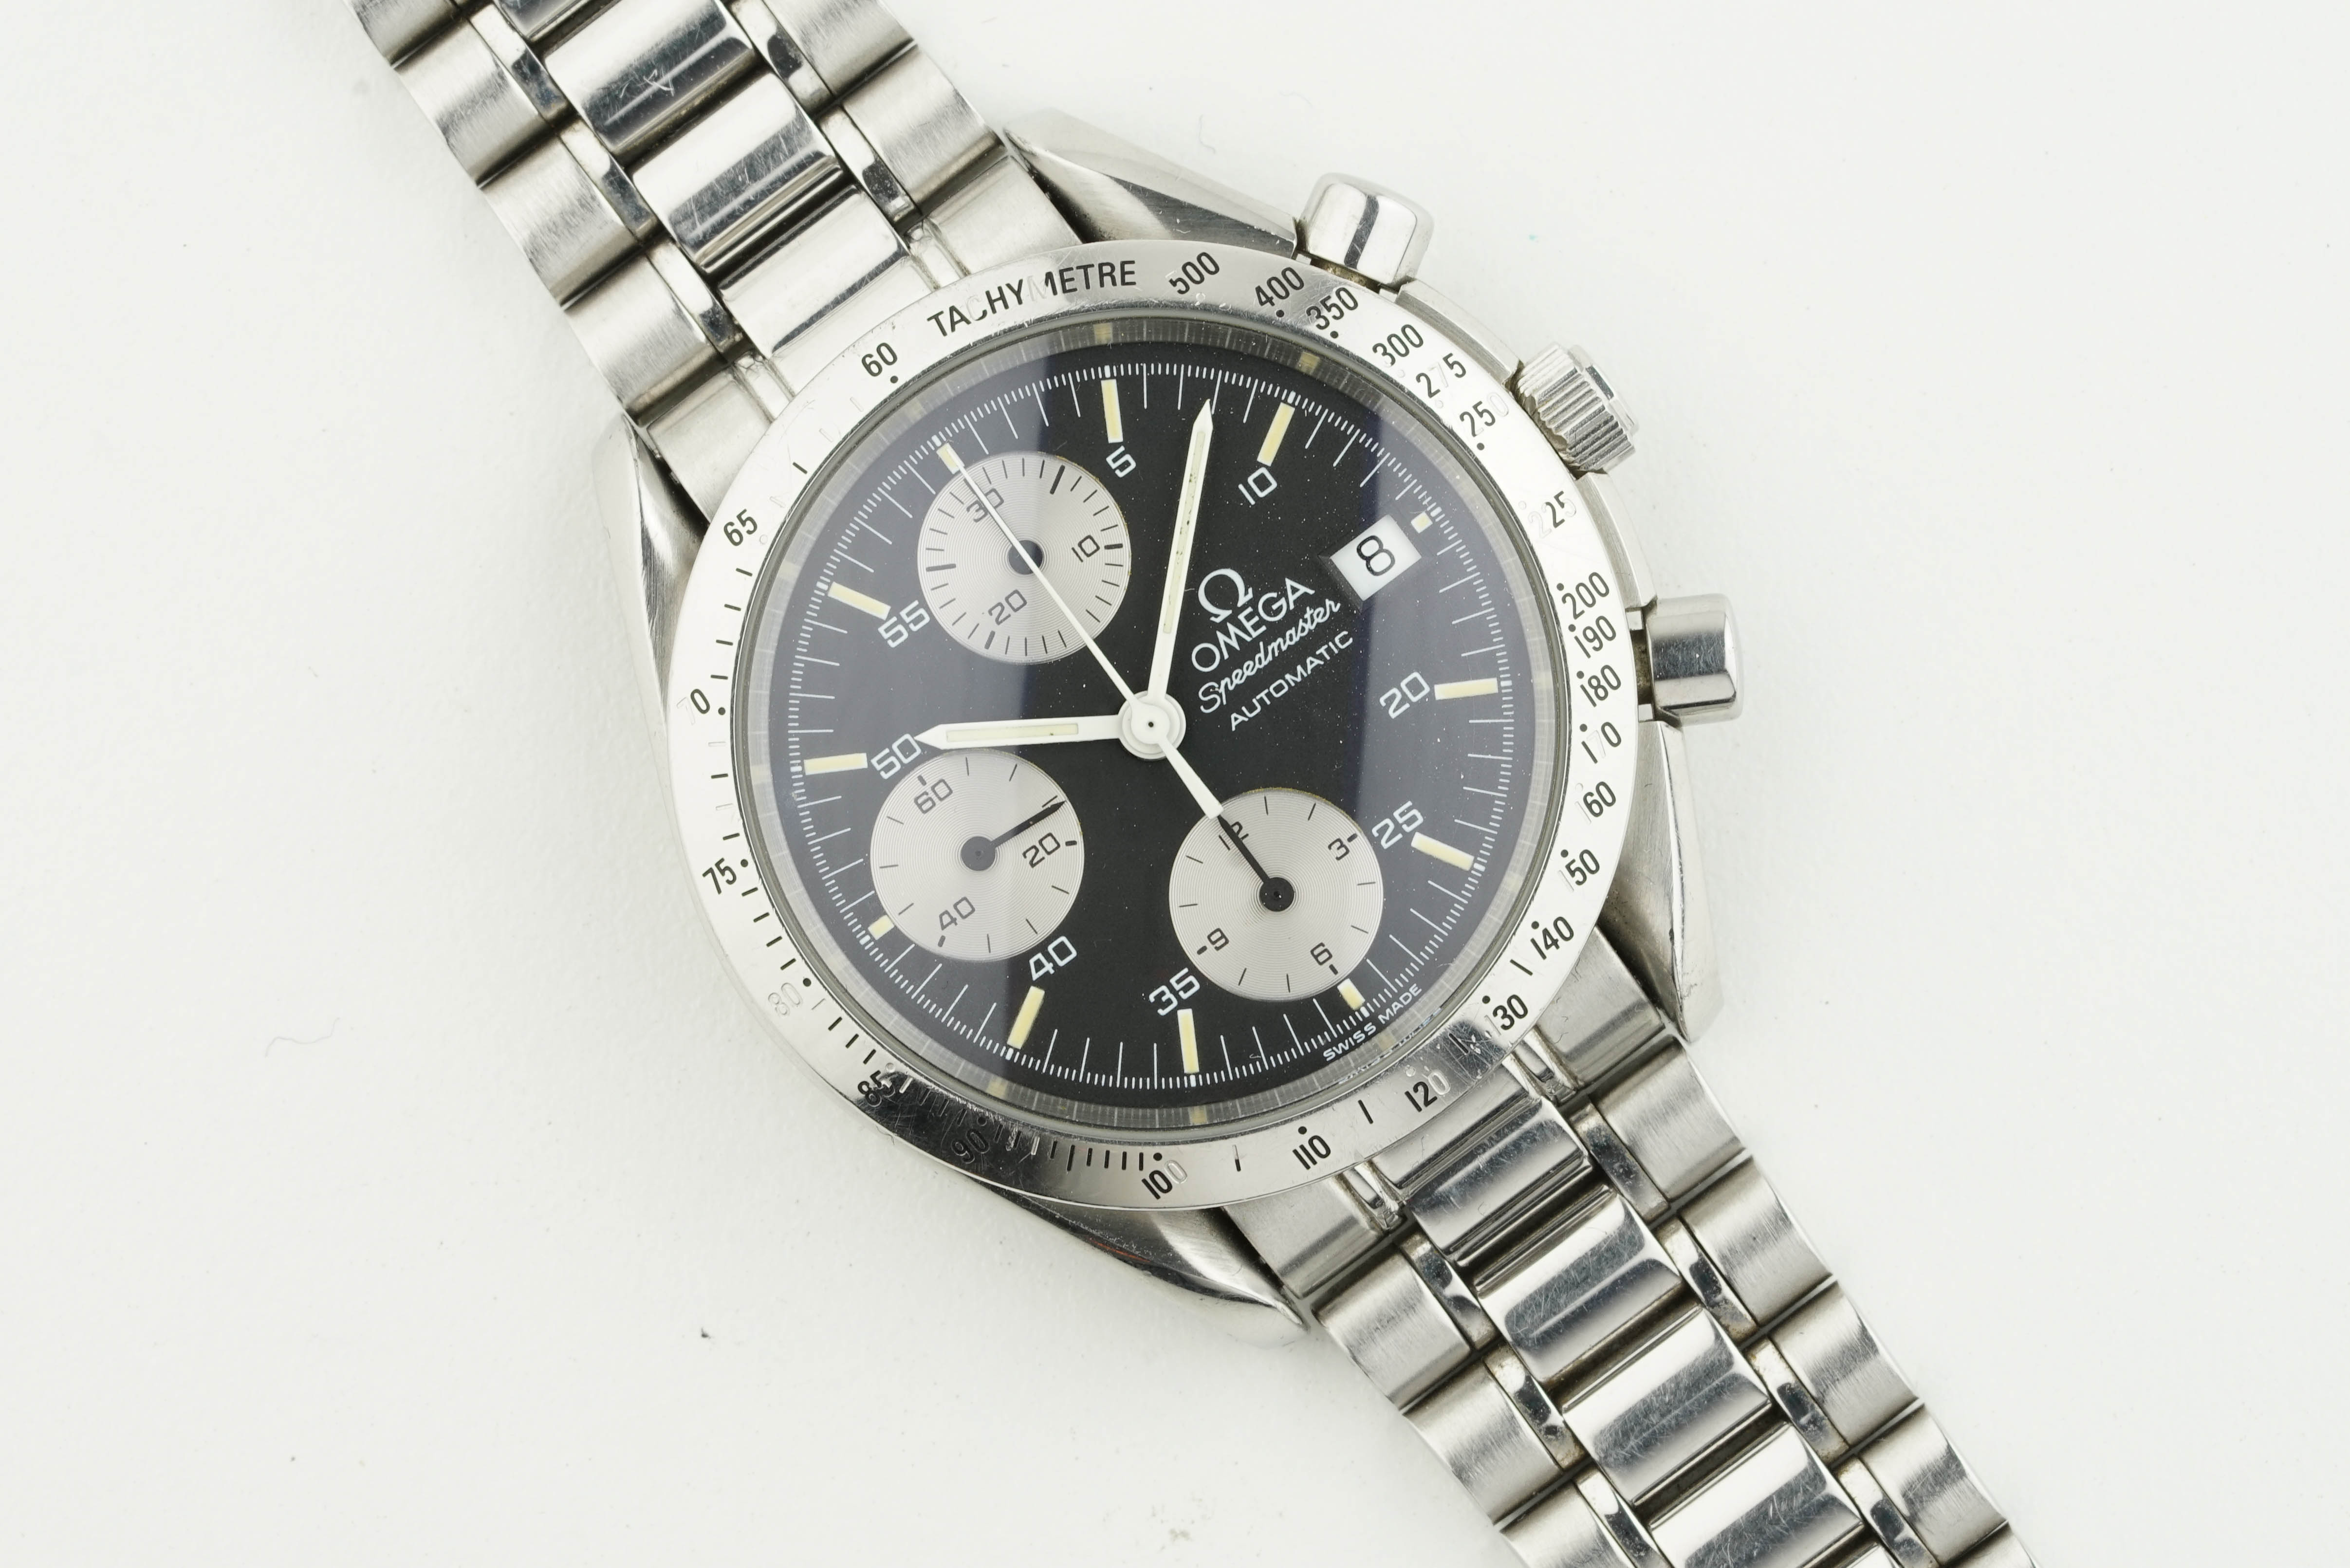 OMEGA SPEEDMASTER AUTOMATIC DATE, circular black dial with hour markers and hands, 39mm case with